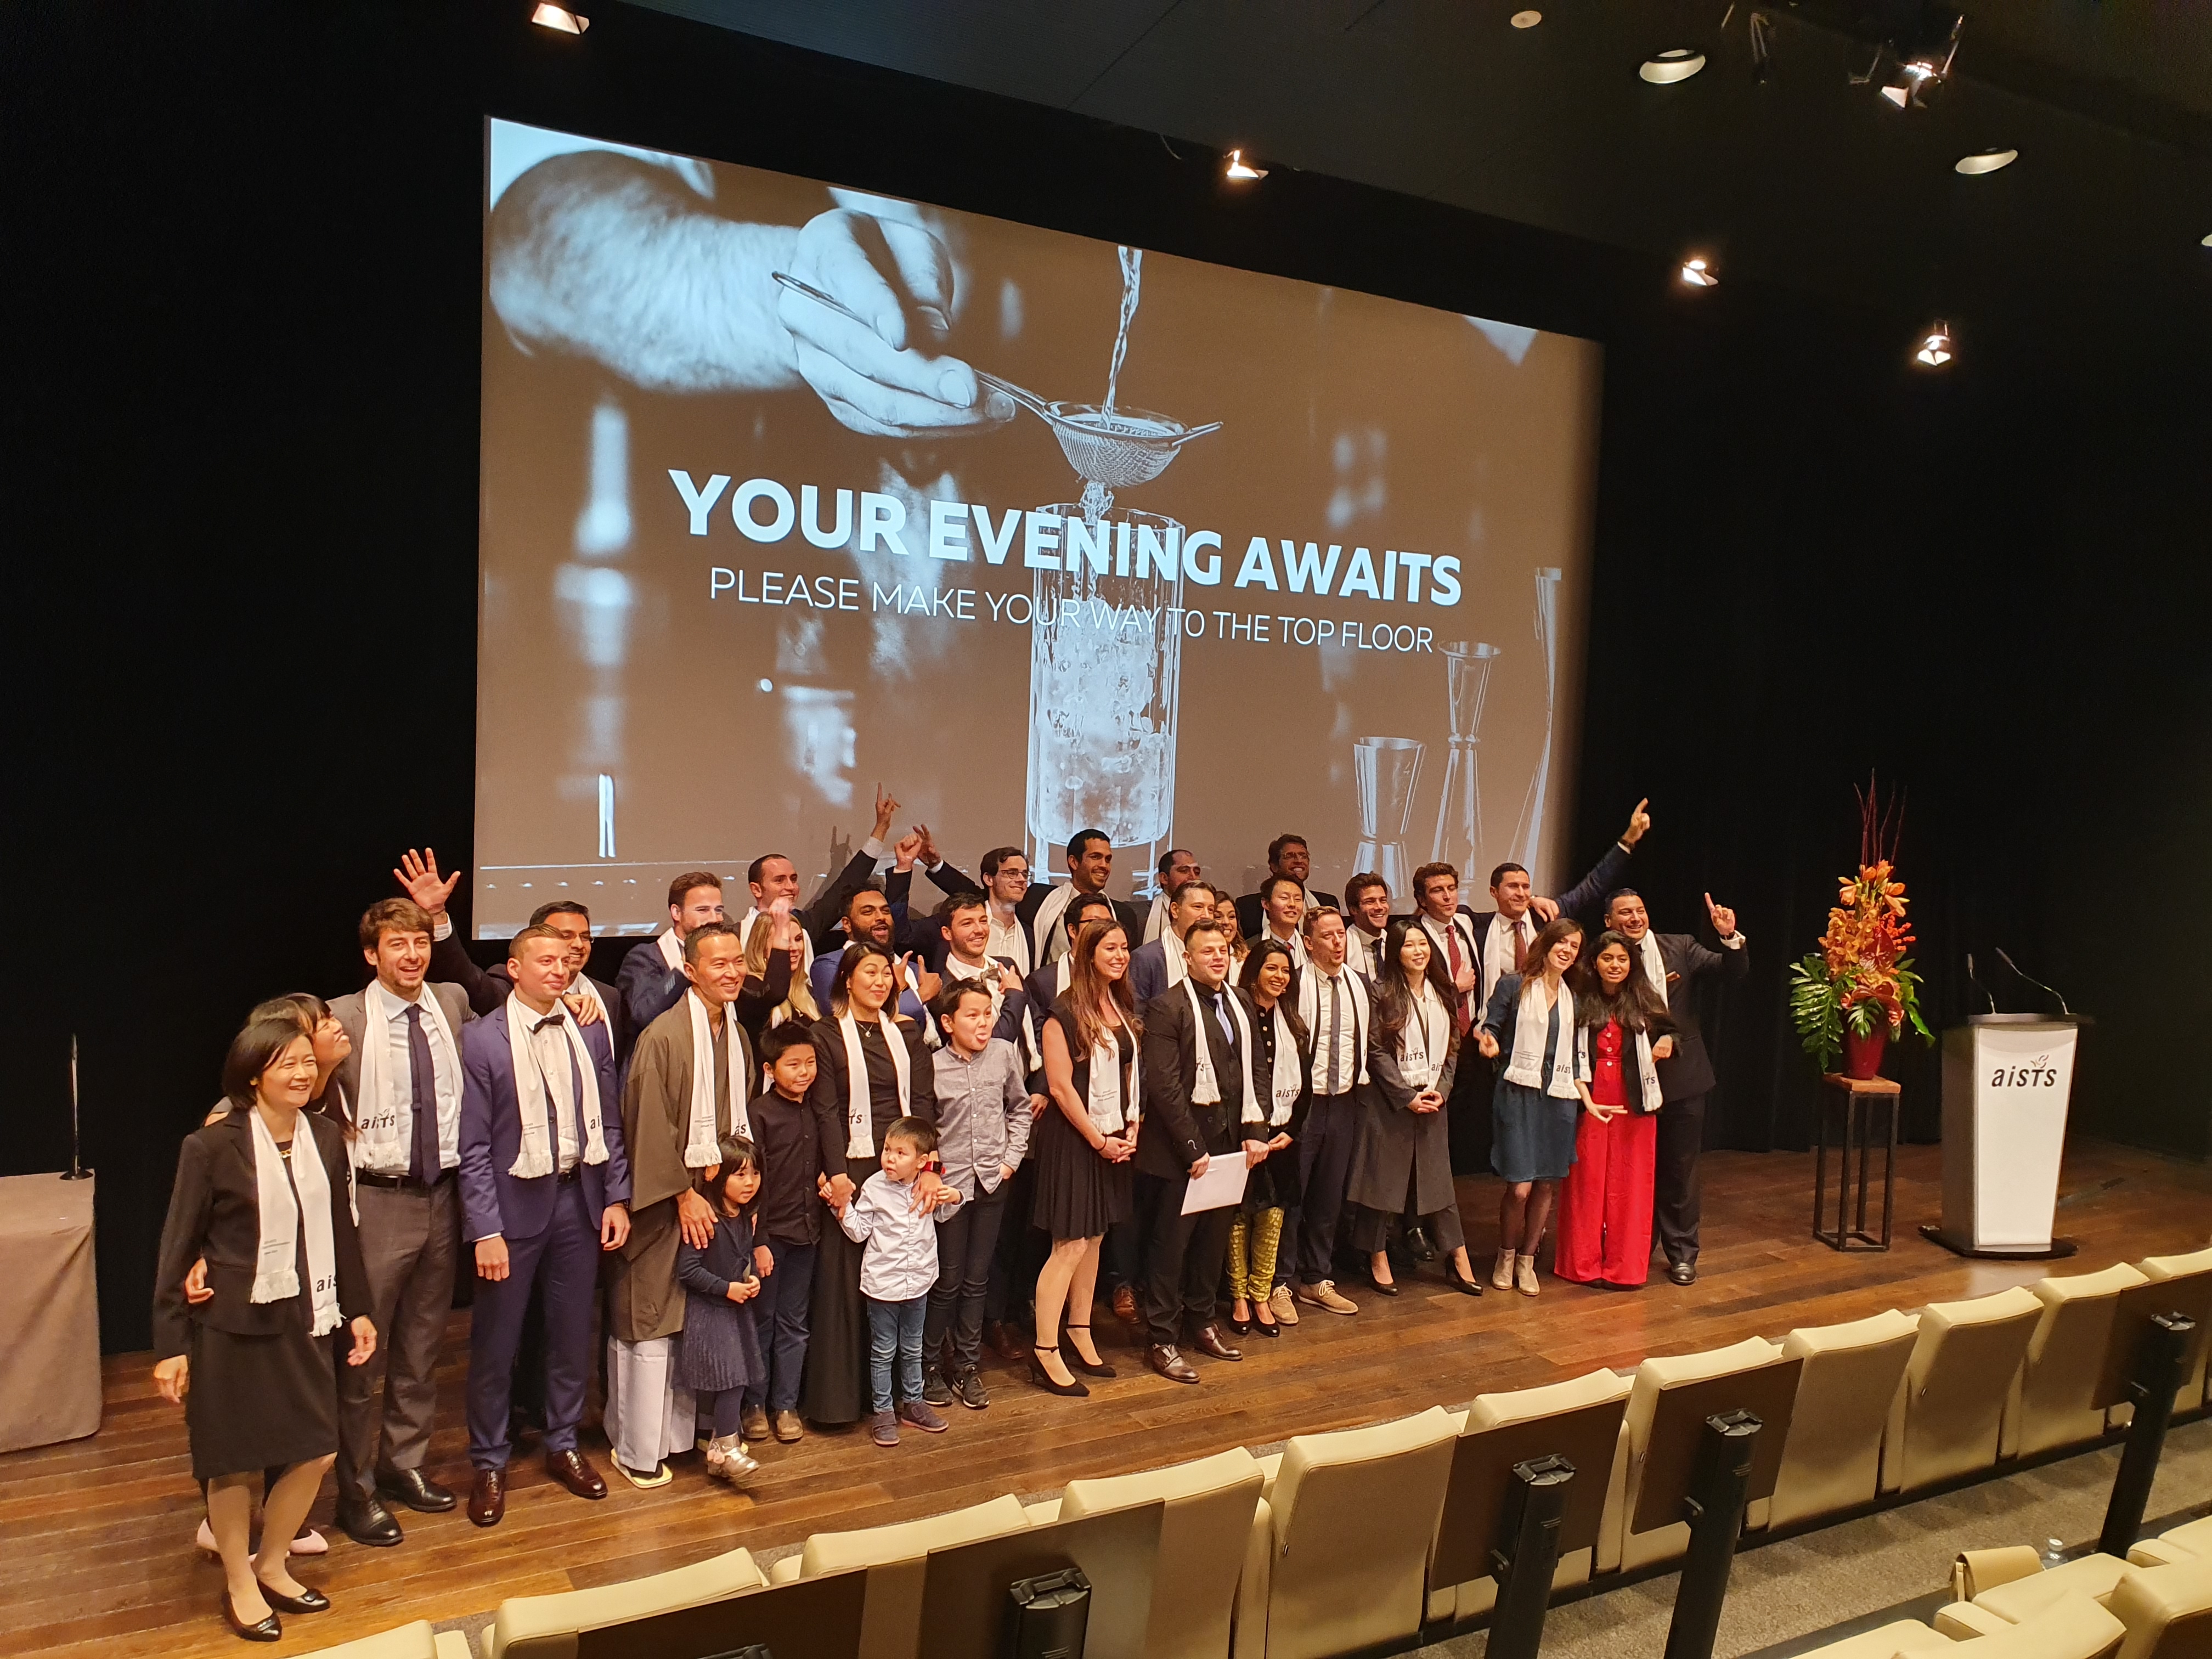 The AISTS class of 2019 group photo at the event held at The Olympic Museum in Lausanne. 